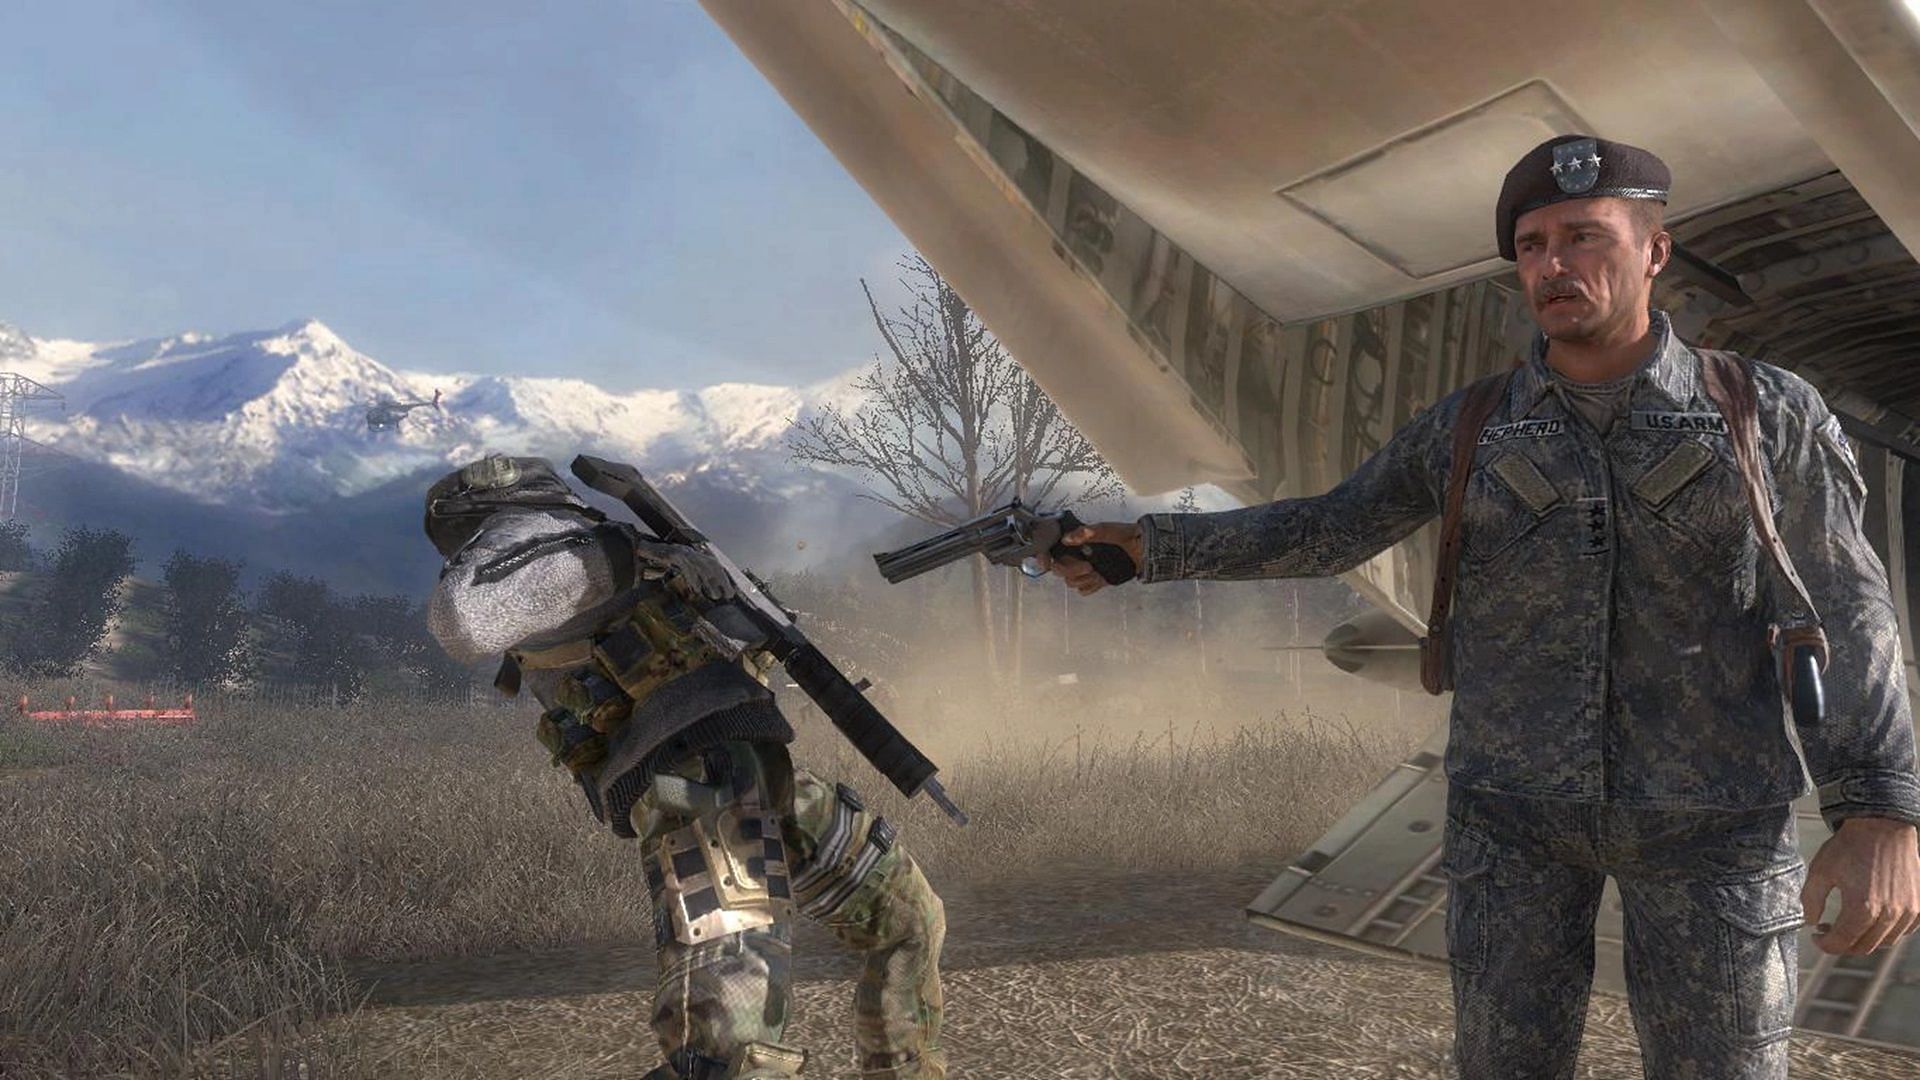 General Shepherd shoots Ghost in Modern Warfare 2 to cover up his tracks (Image via Activision)